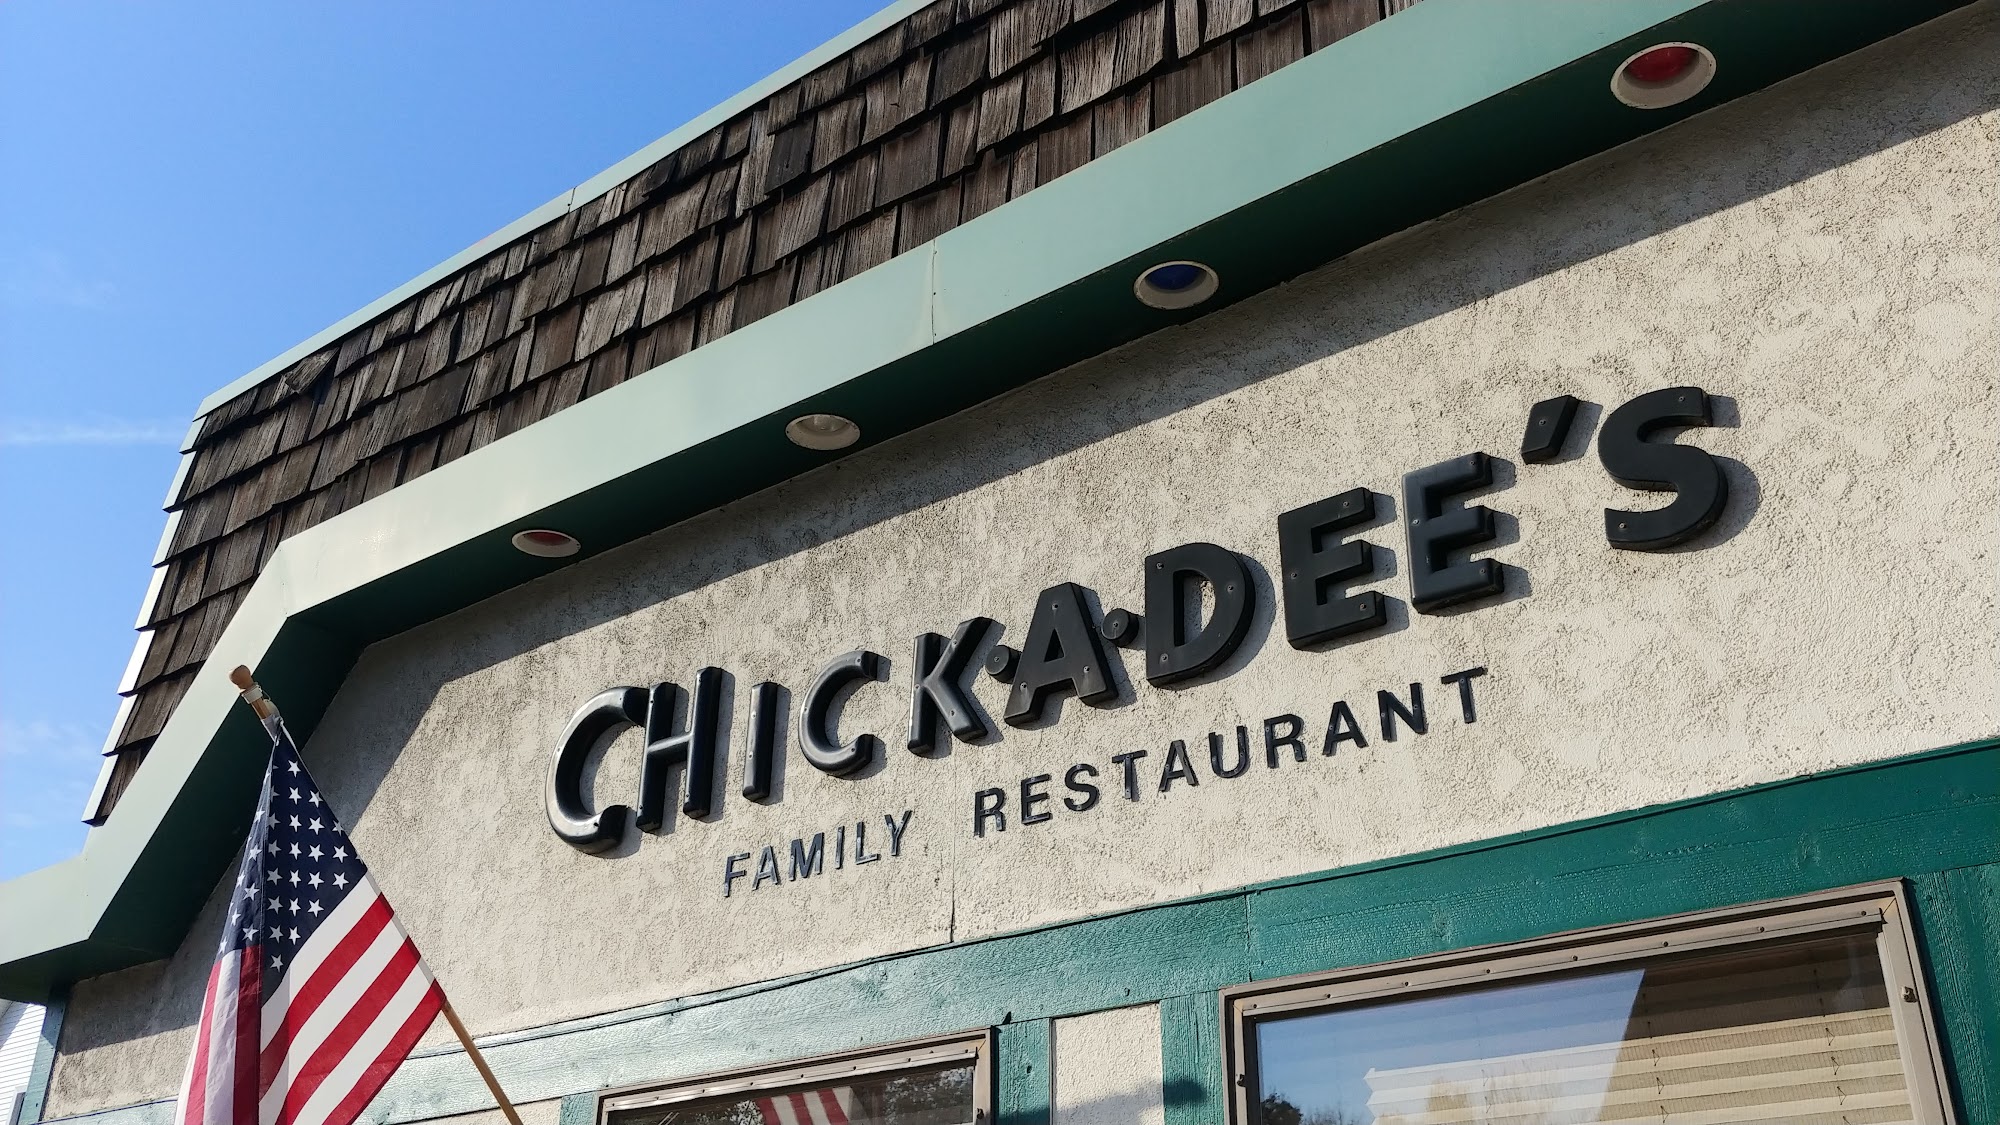 Chick-A-Dee's Family Restaurant